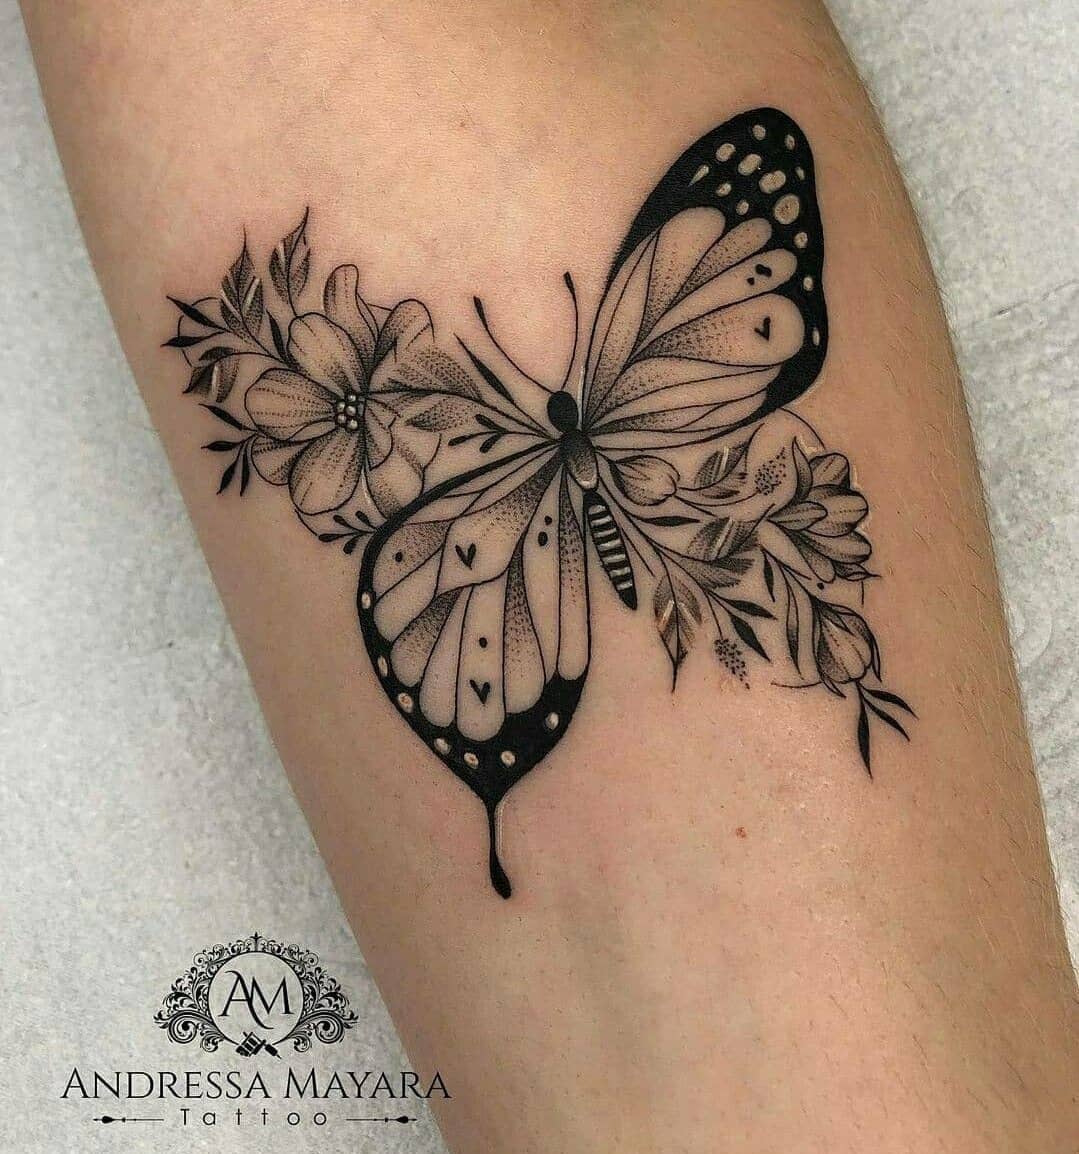 30+ Best Butterfly Tattoos Design You’ll Love To Get Next. Butterfly Tattoos with flowers